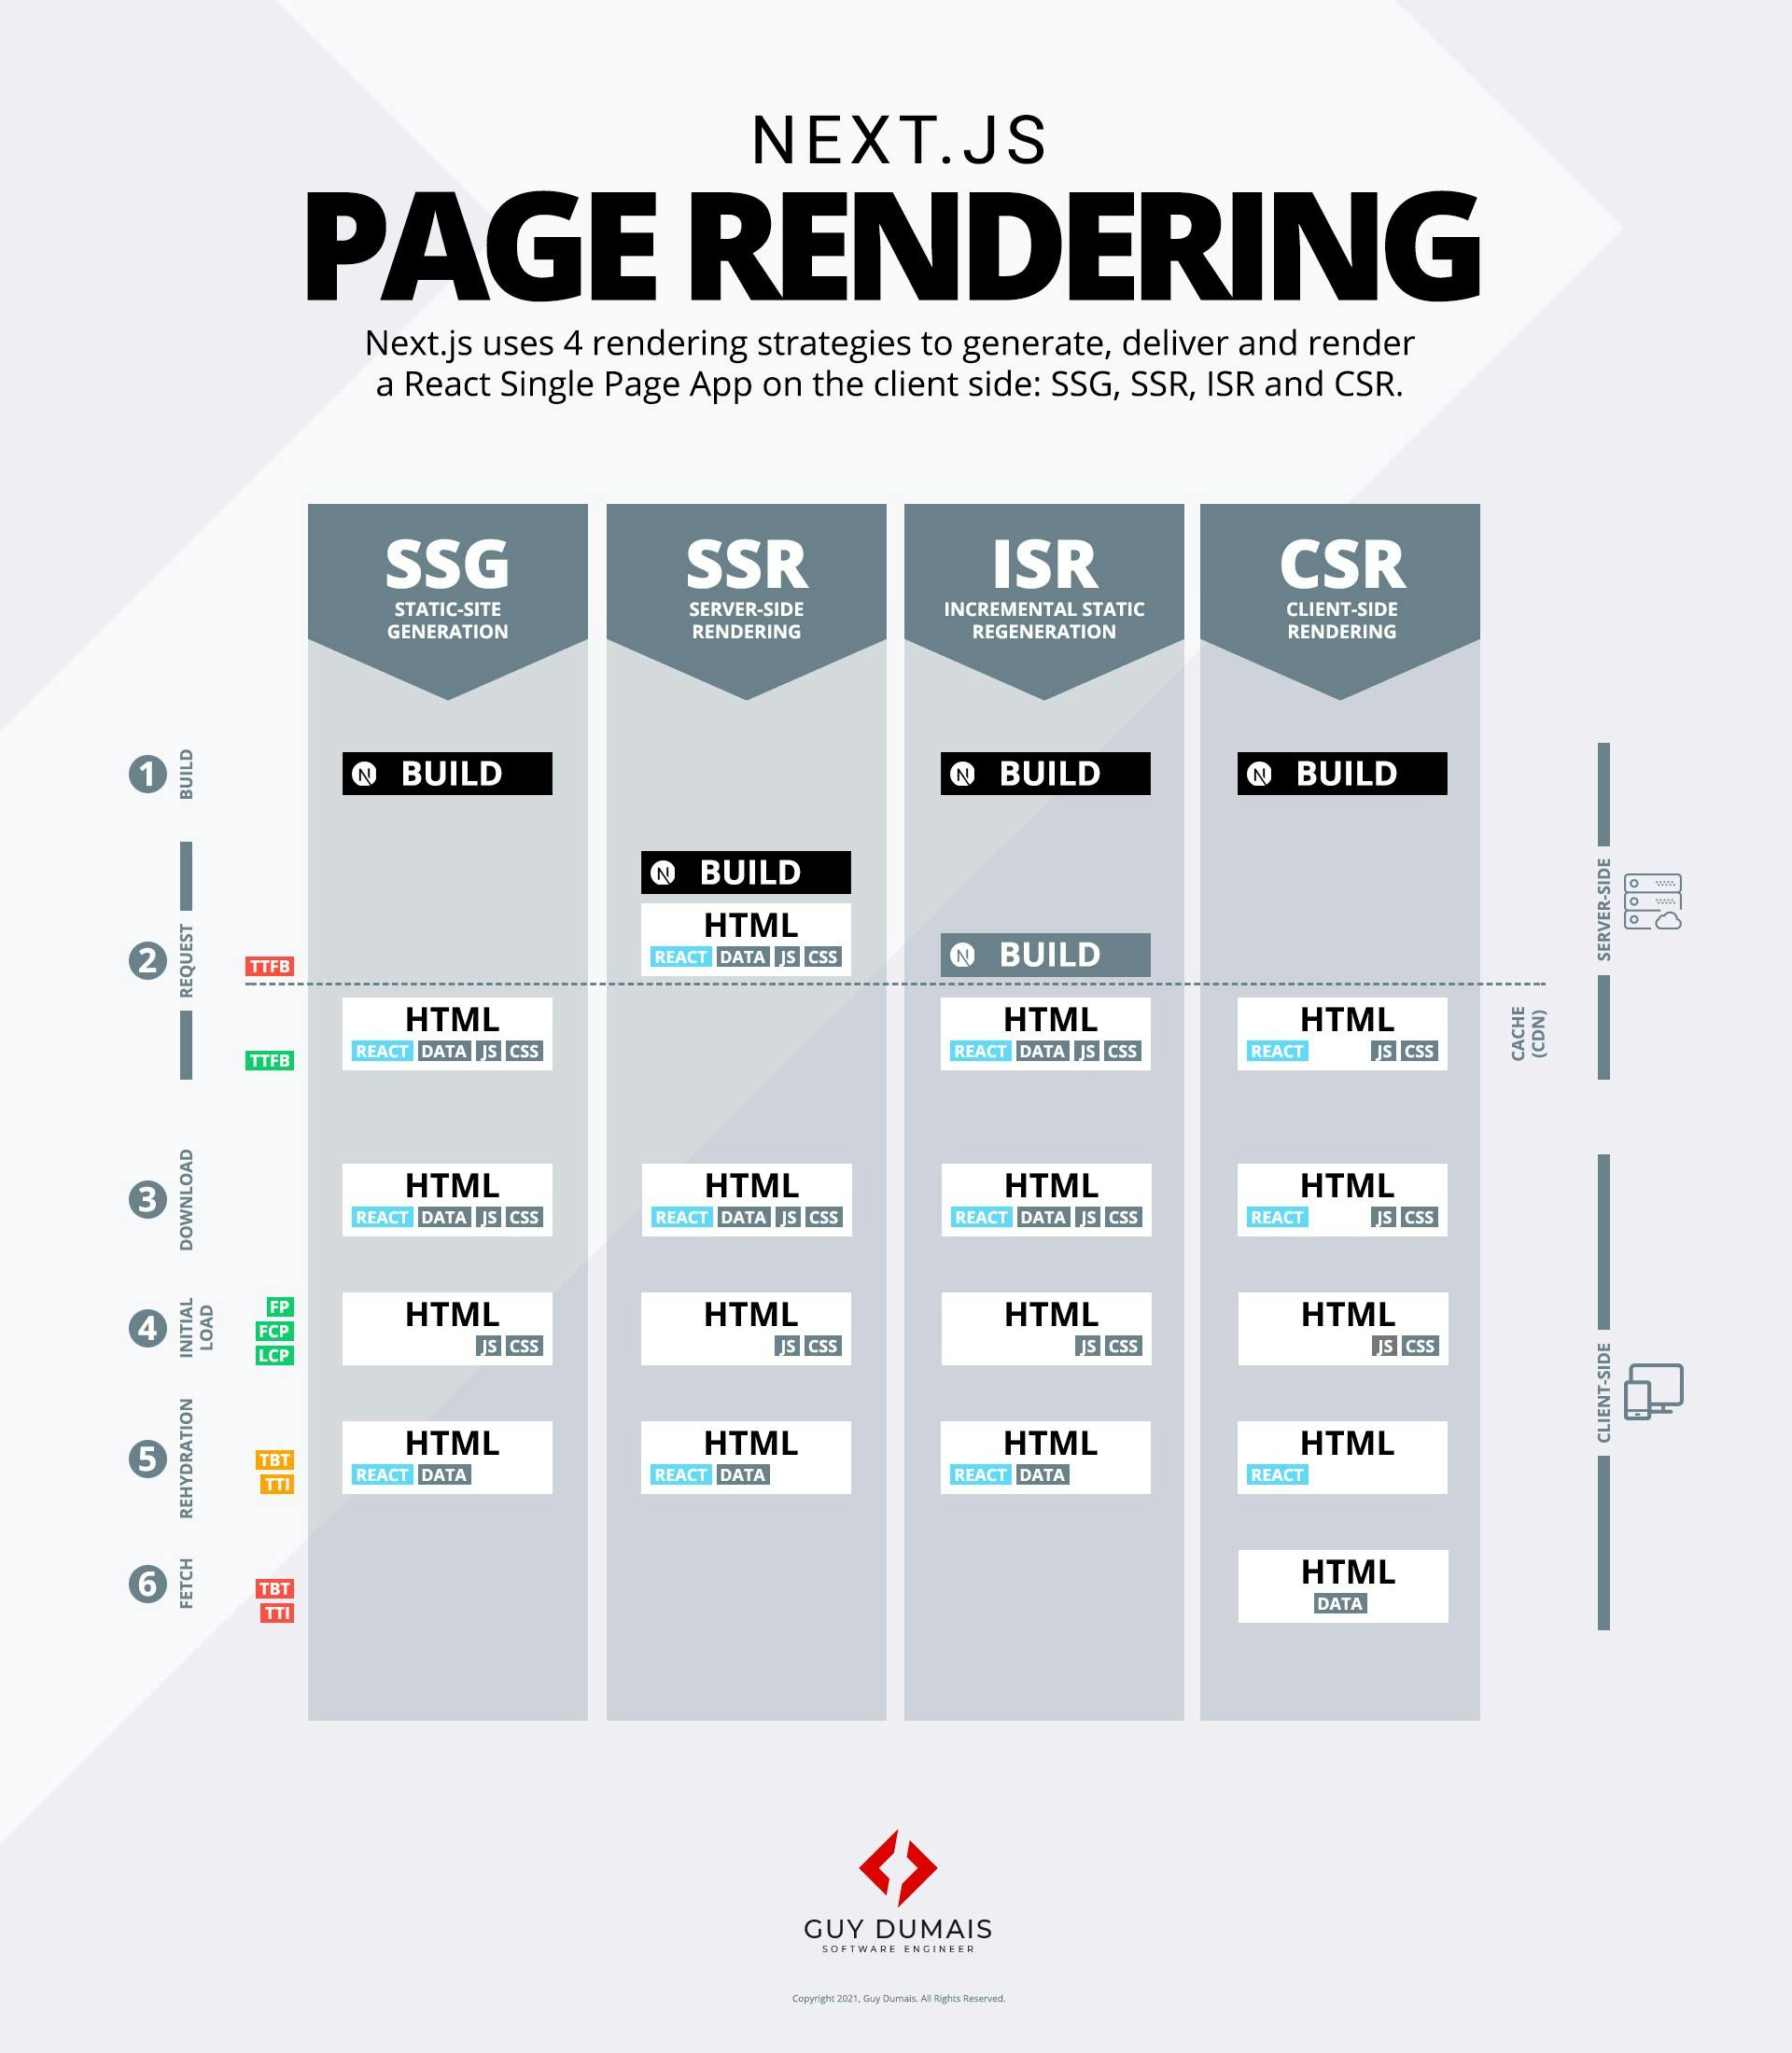 Next.js: The Ultimate Cheat Sheet to Page Rendering